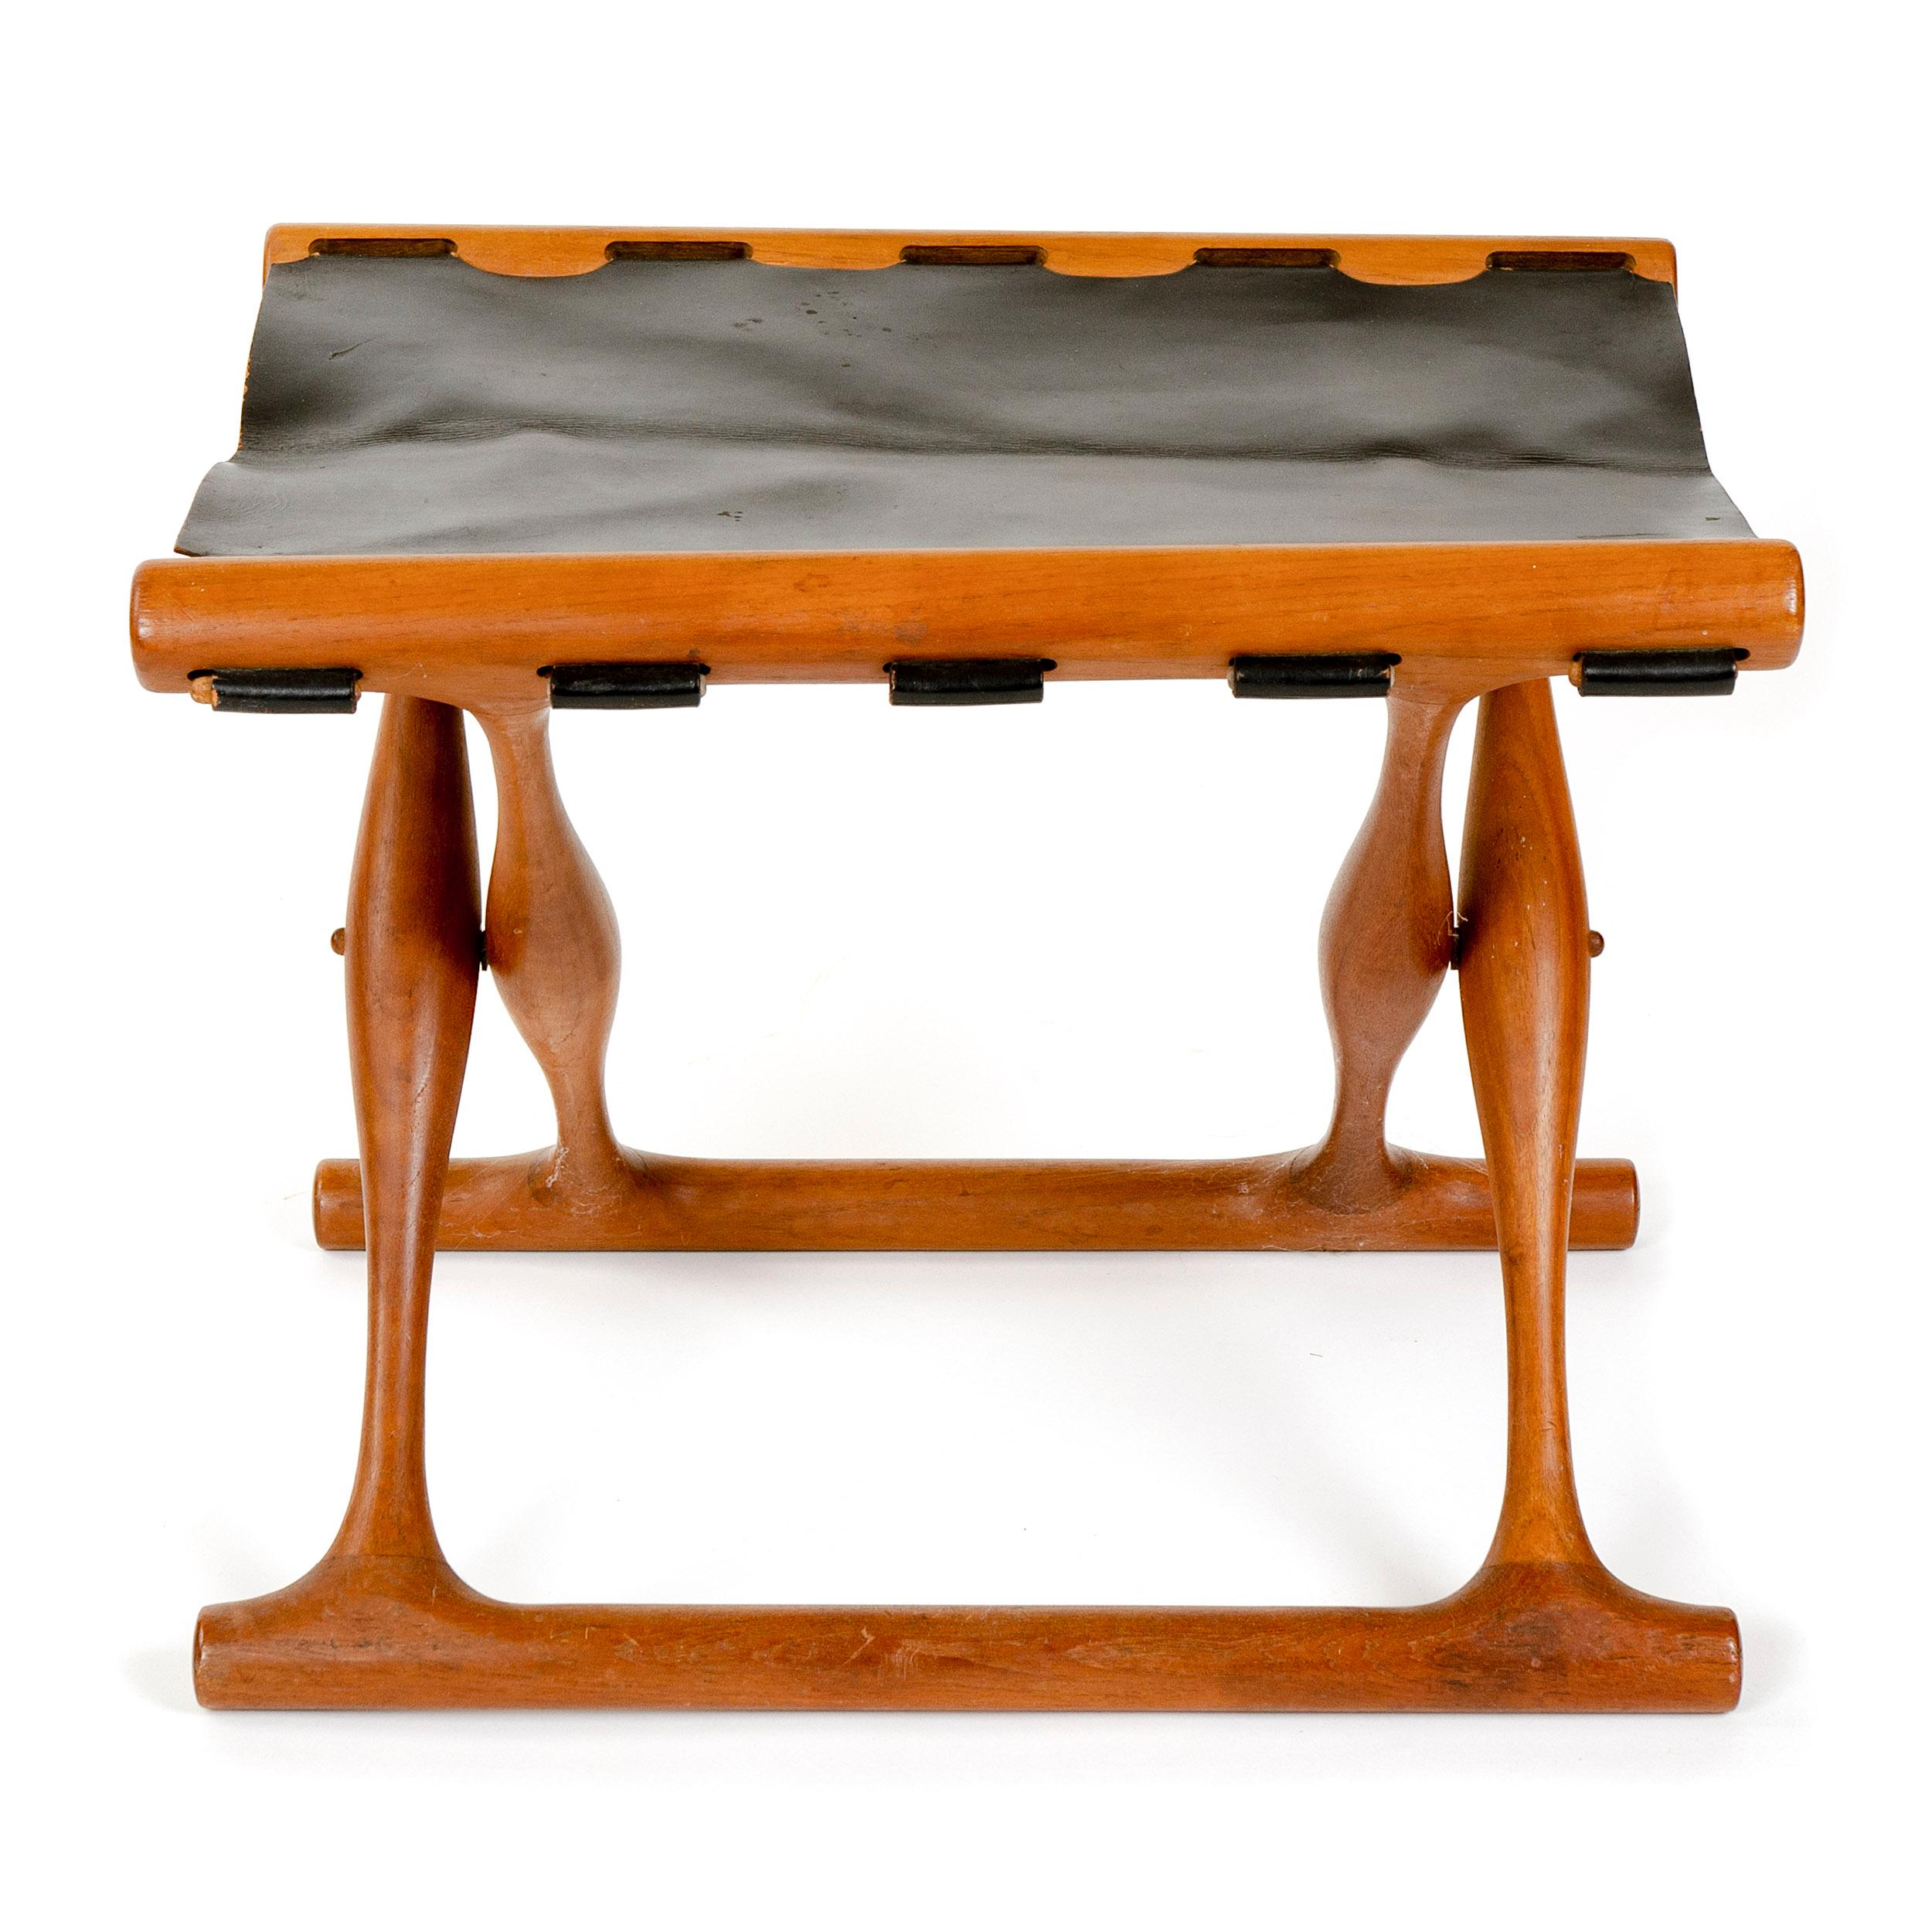 A teak folding stool with a black leather sling seat. Famed copy of oldest existing piece of furniture in Scandinavia.